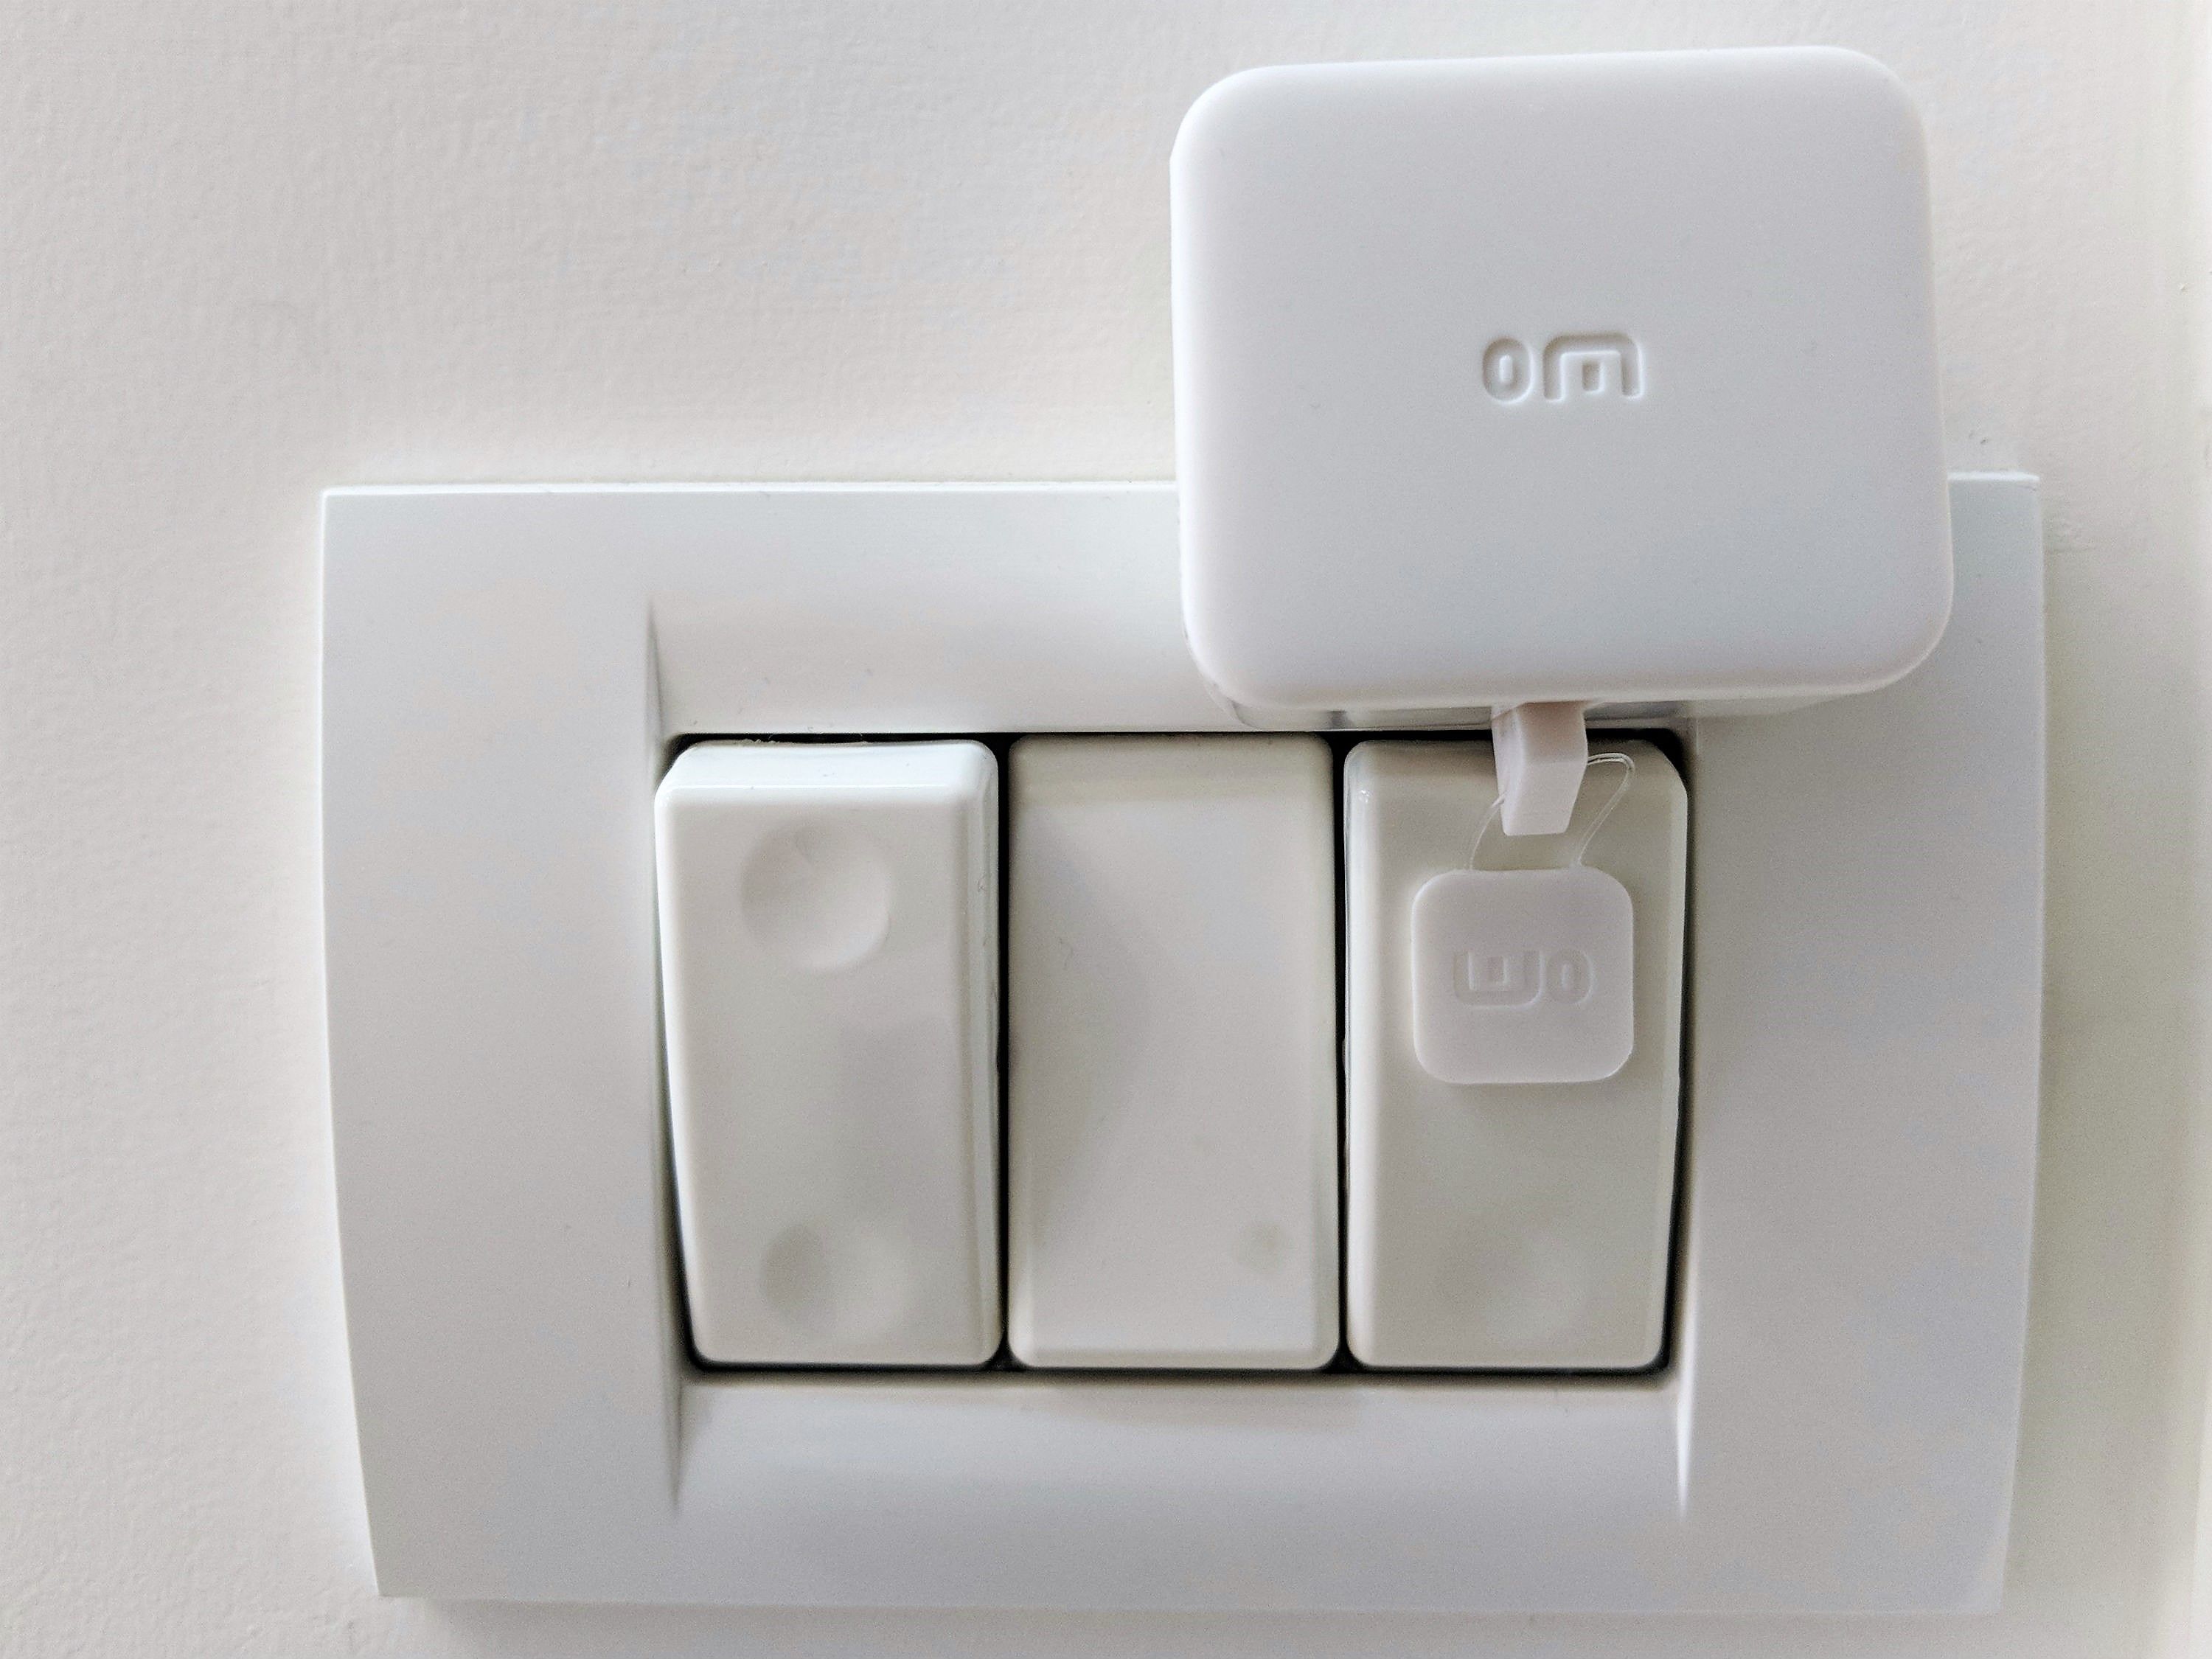 SwitchBot review: Simple automation for any switch or button in your home